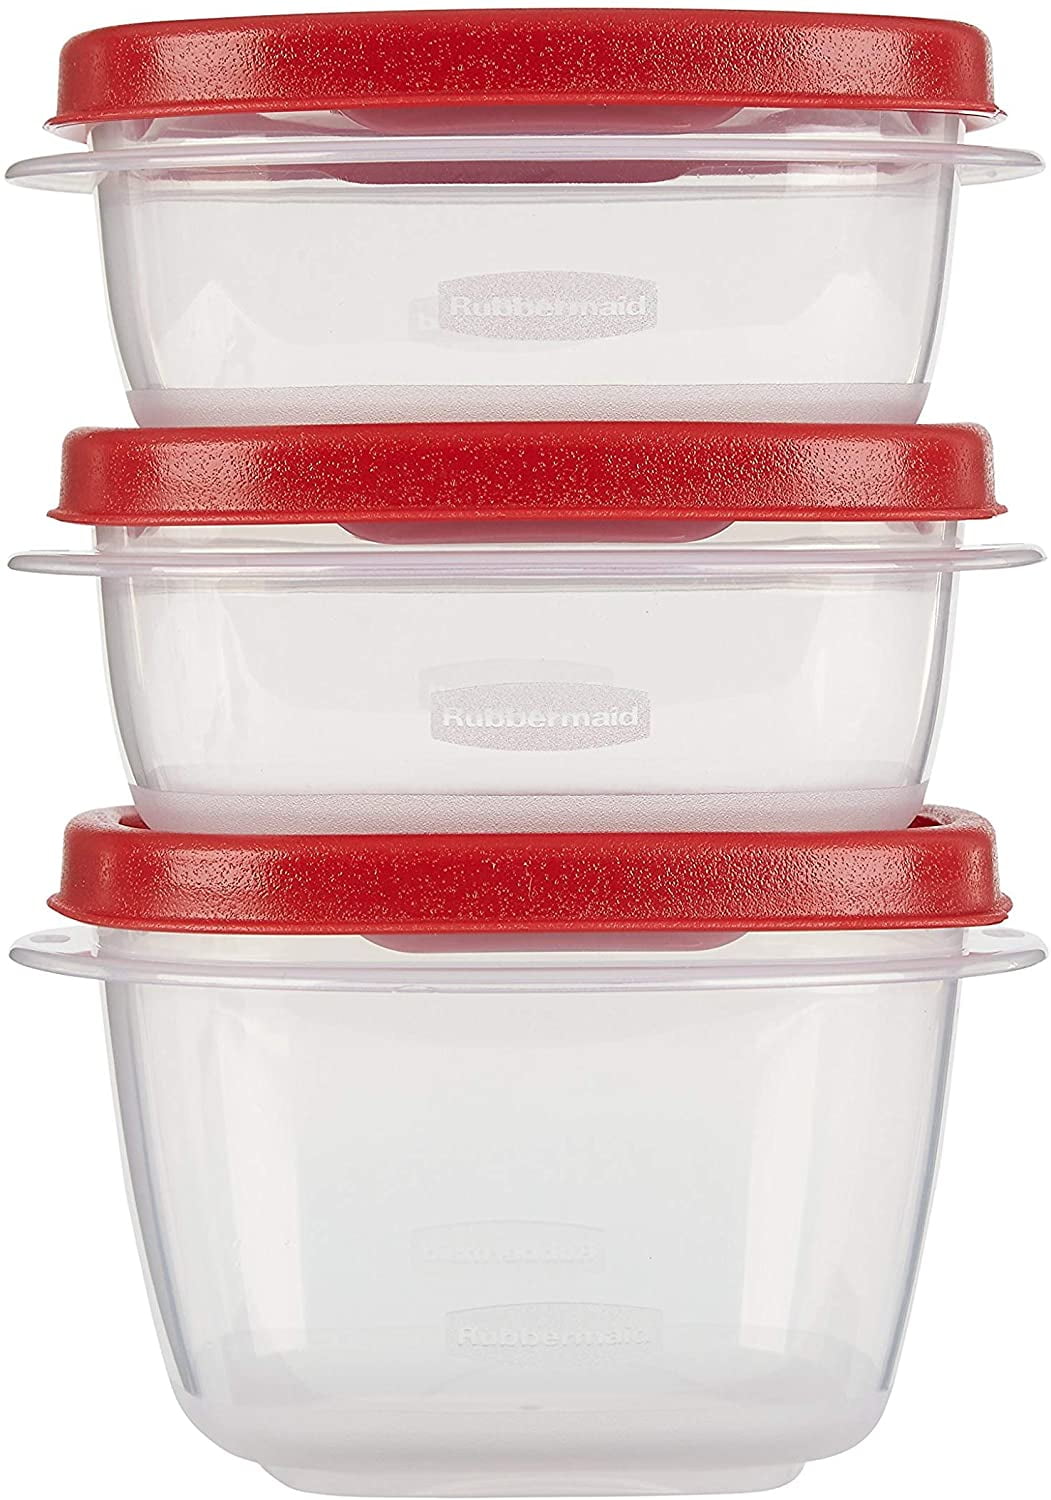 Rubbermaid® Easy-Find Lids Two-Cup Food Storage Container, 2 pk / 5 x 5 x 3  in - Baker's